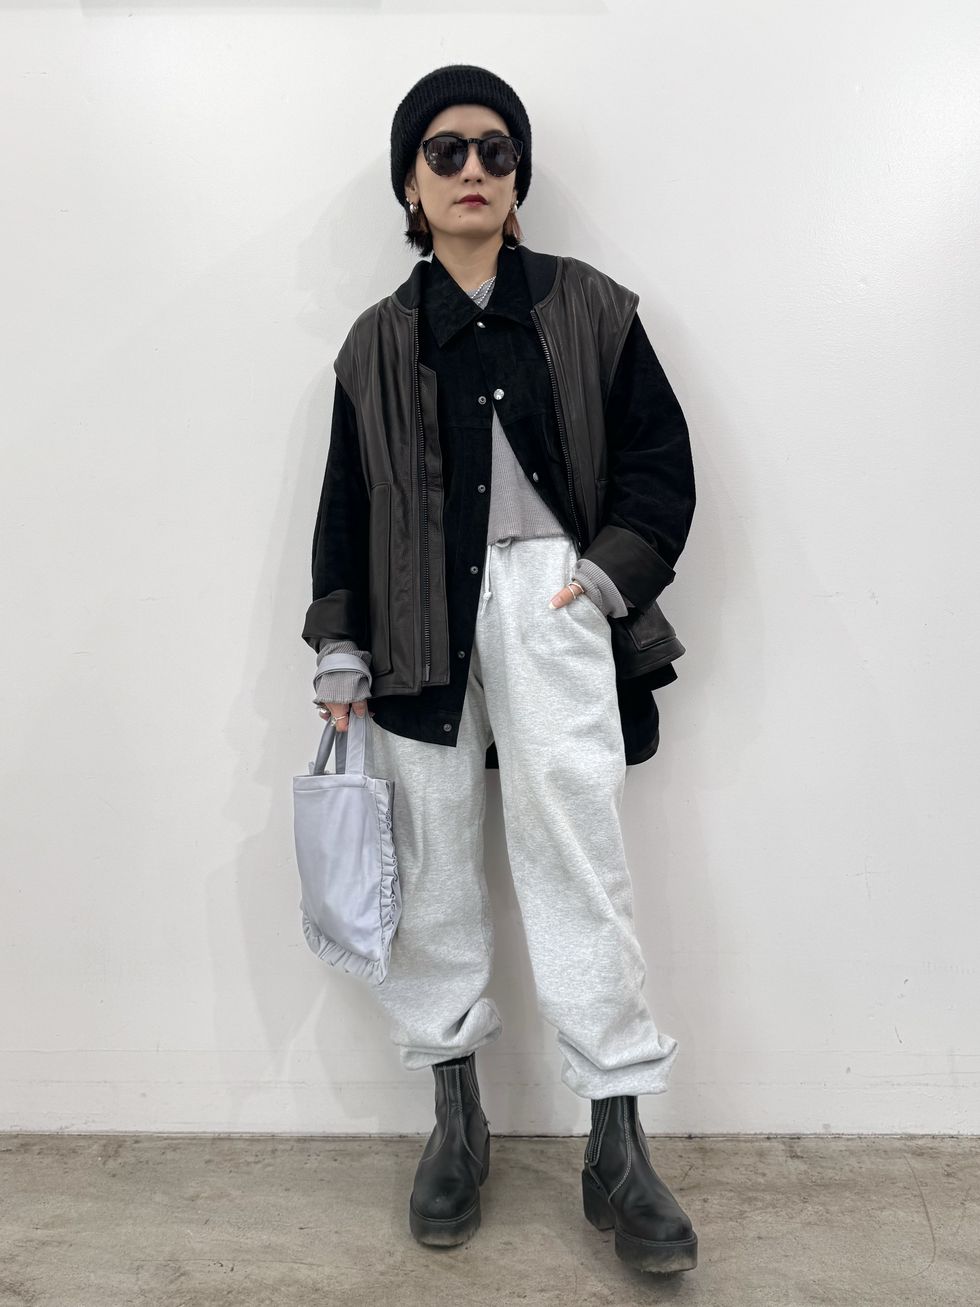 a person wearing a black jacket and white pants holding a white bag